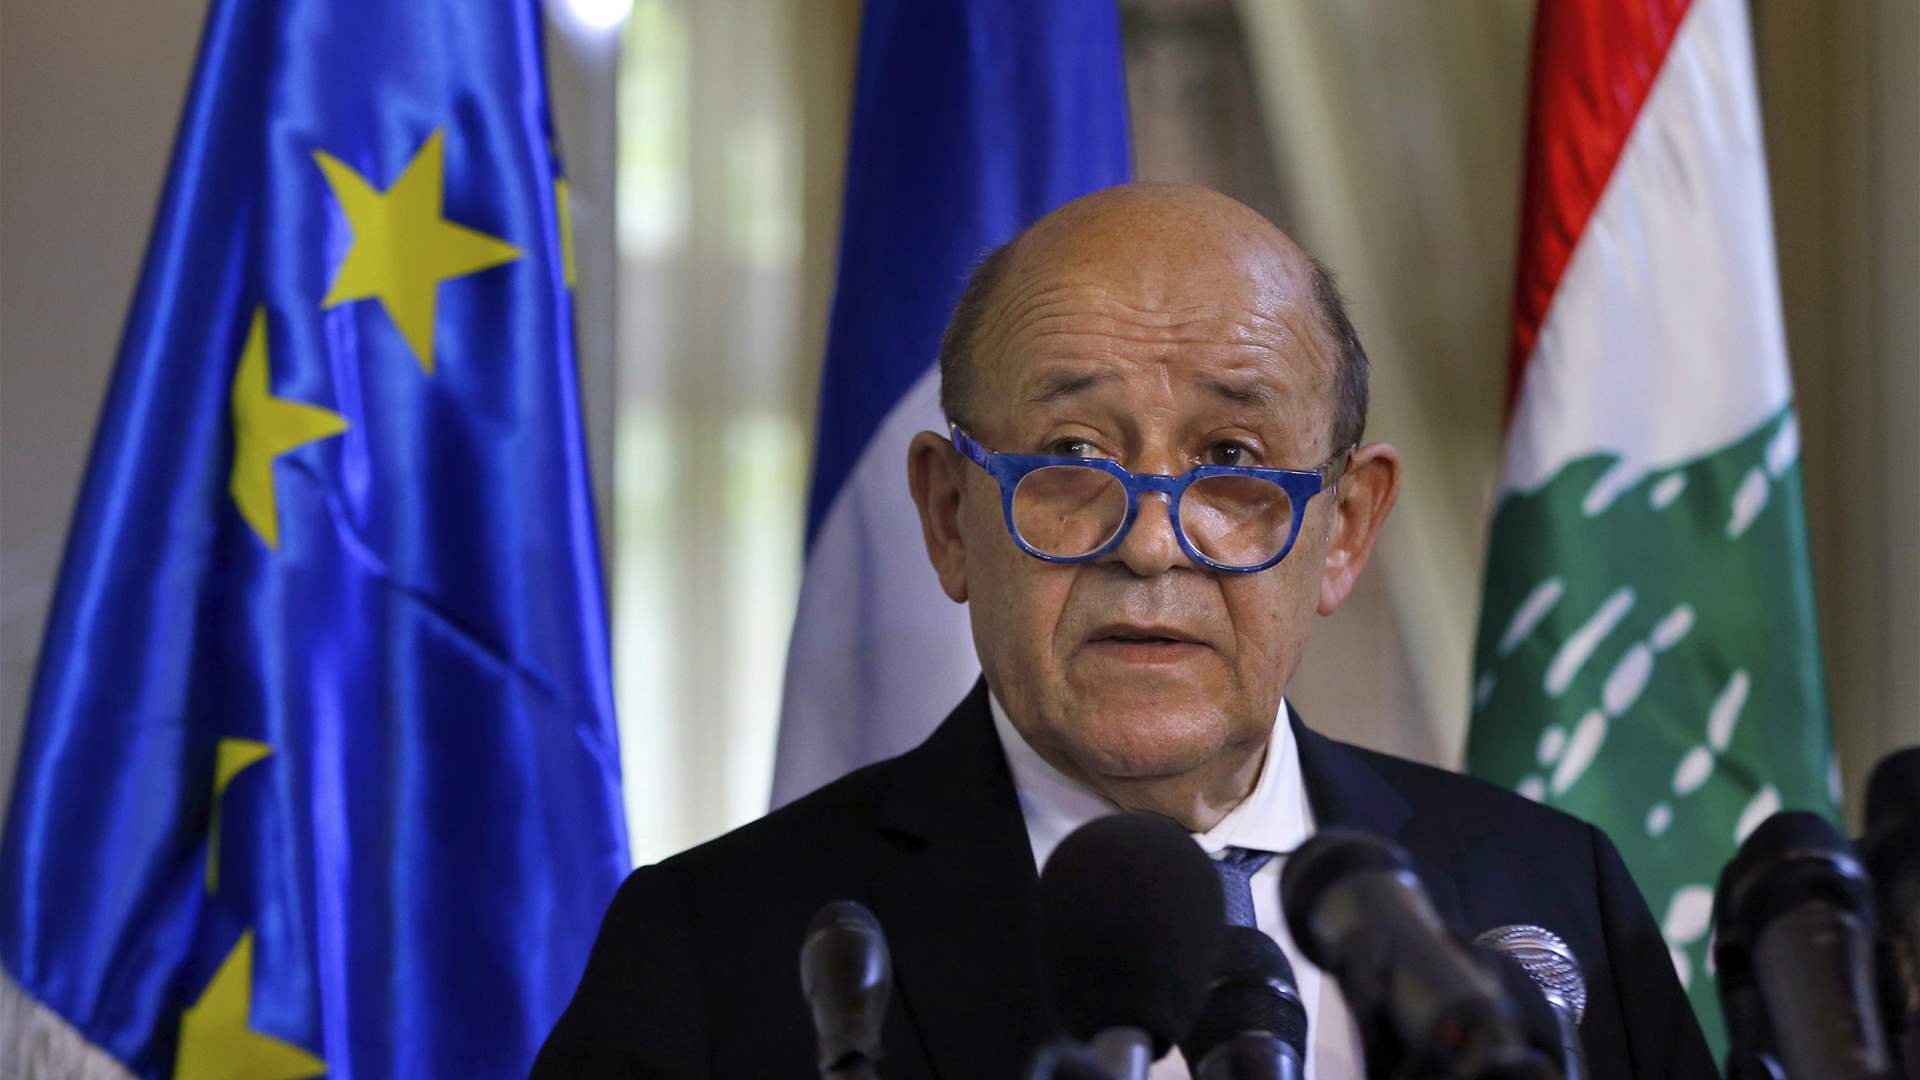 Jean-Yves Le Drian to arrive in Beirut on July 25: LBCI sources confirm